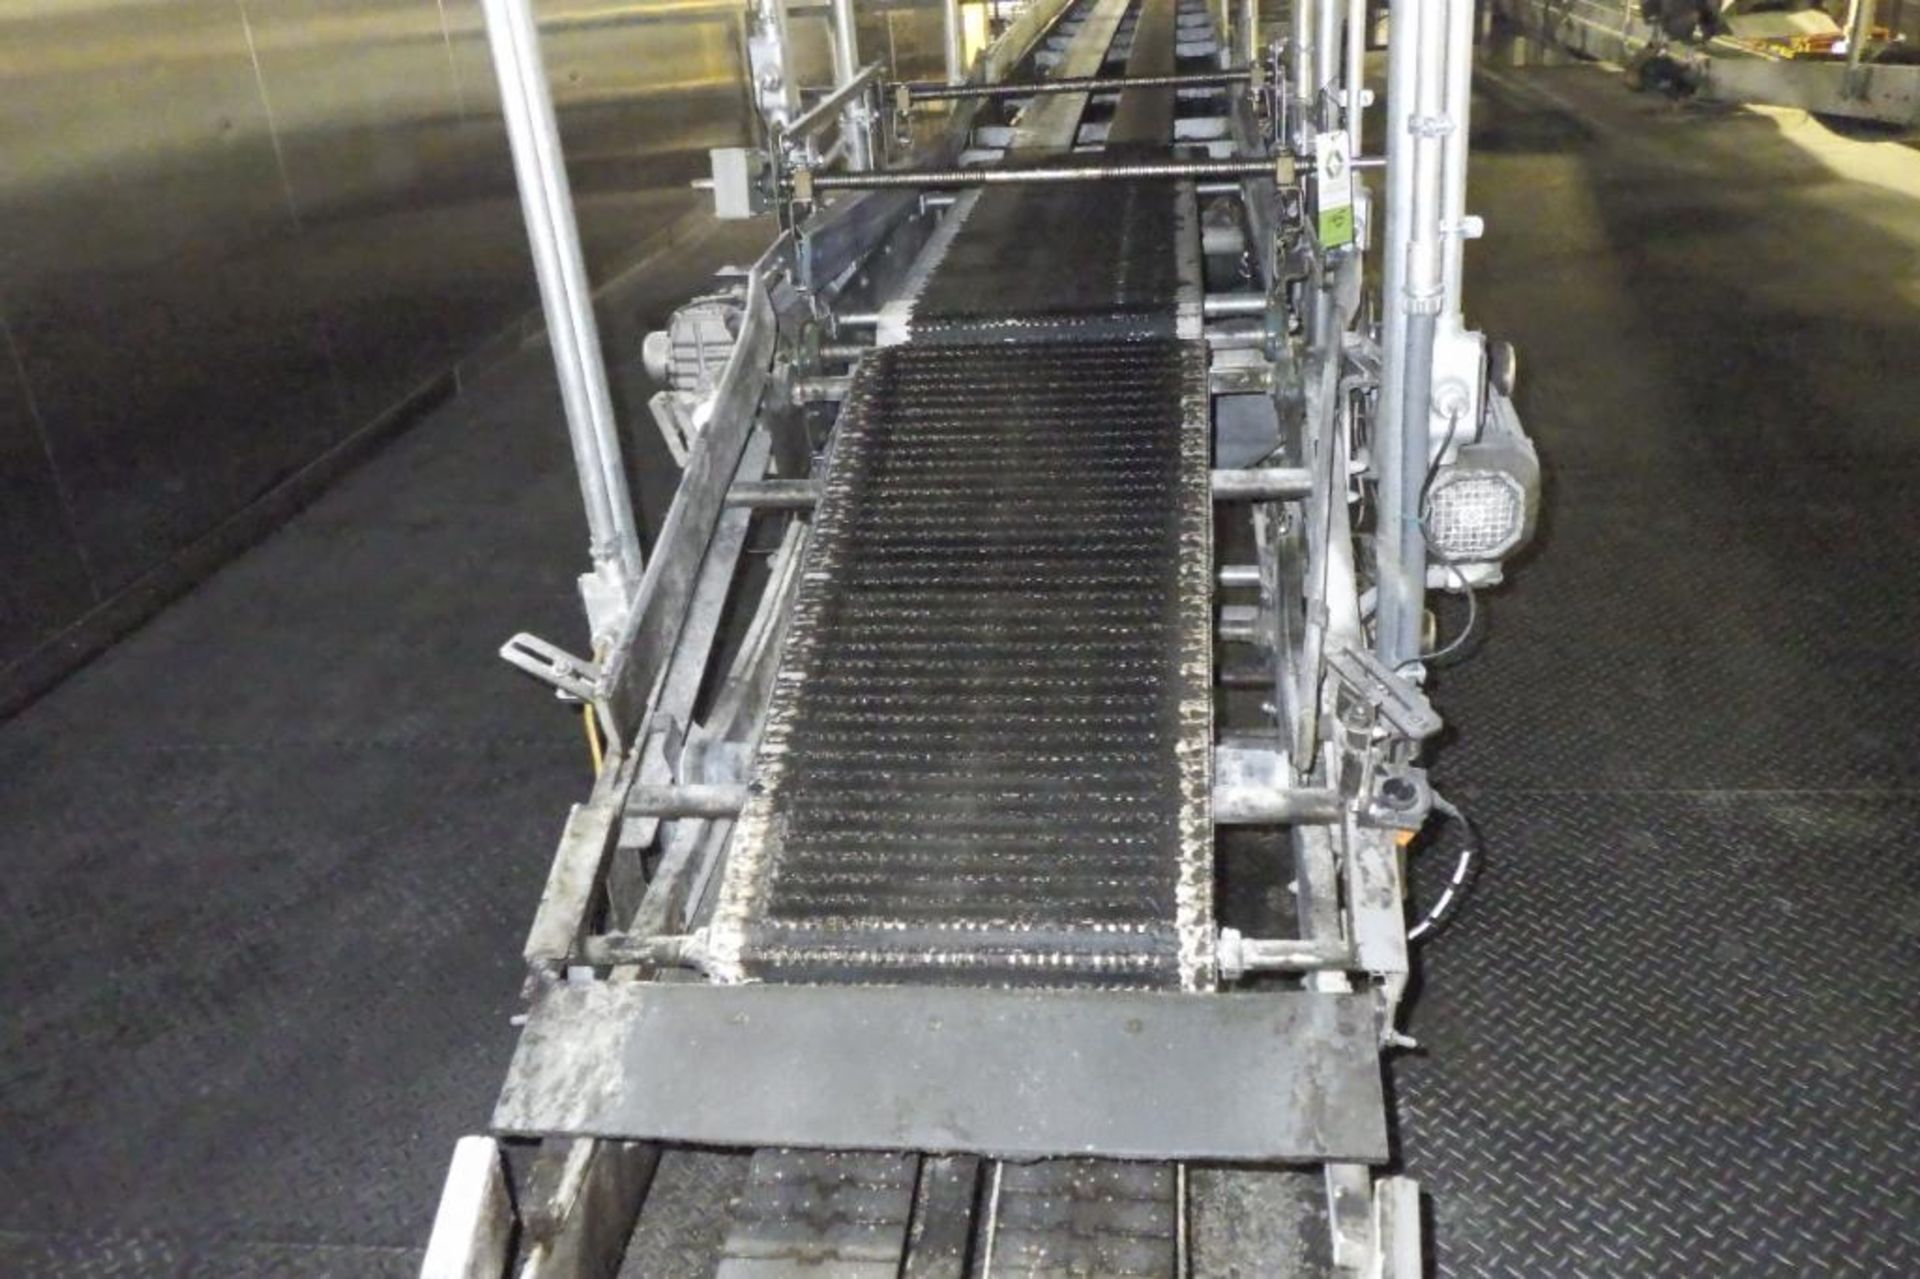 Stewart systems 2-level diverting conveyor - Image 2 of 11